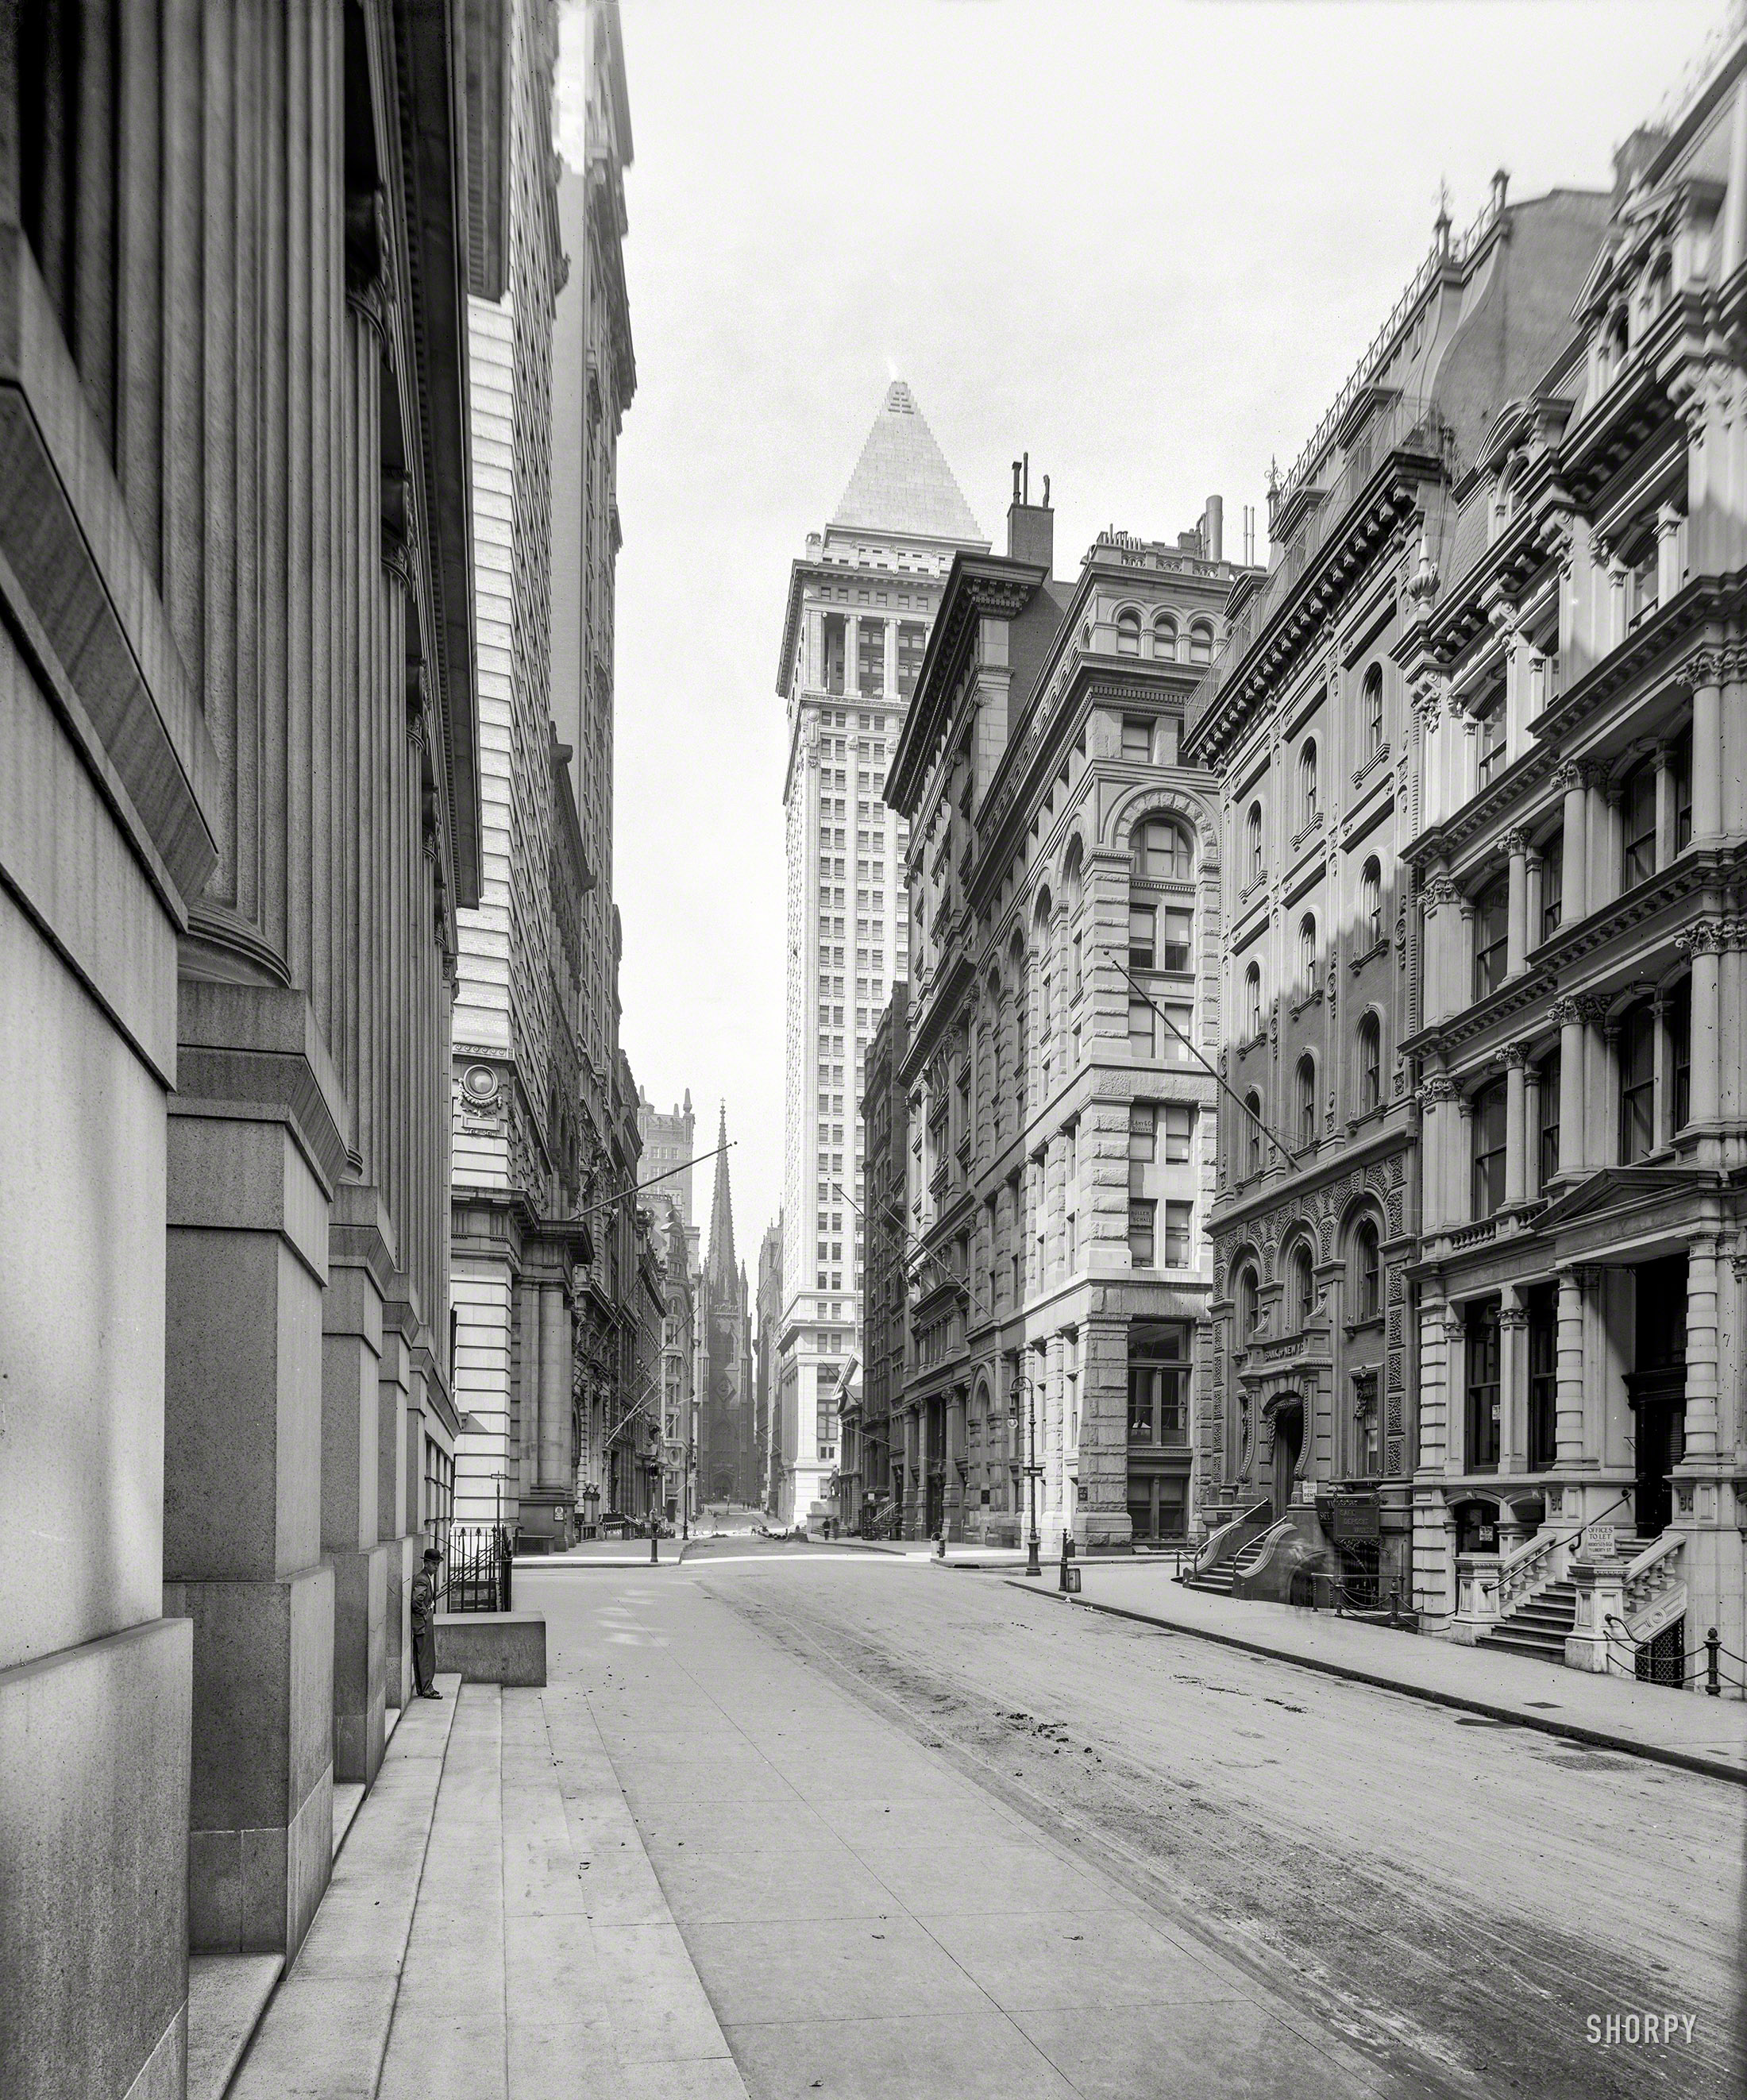 New York circa 1912. "Wall Street with view of Bankers Trust Building and Trinity Church." 8x10 inch glass negative, Detroit Publishing Company. View full size.